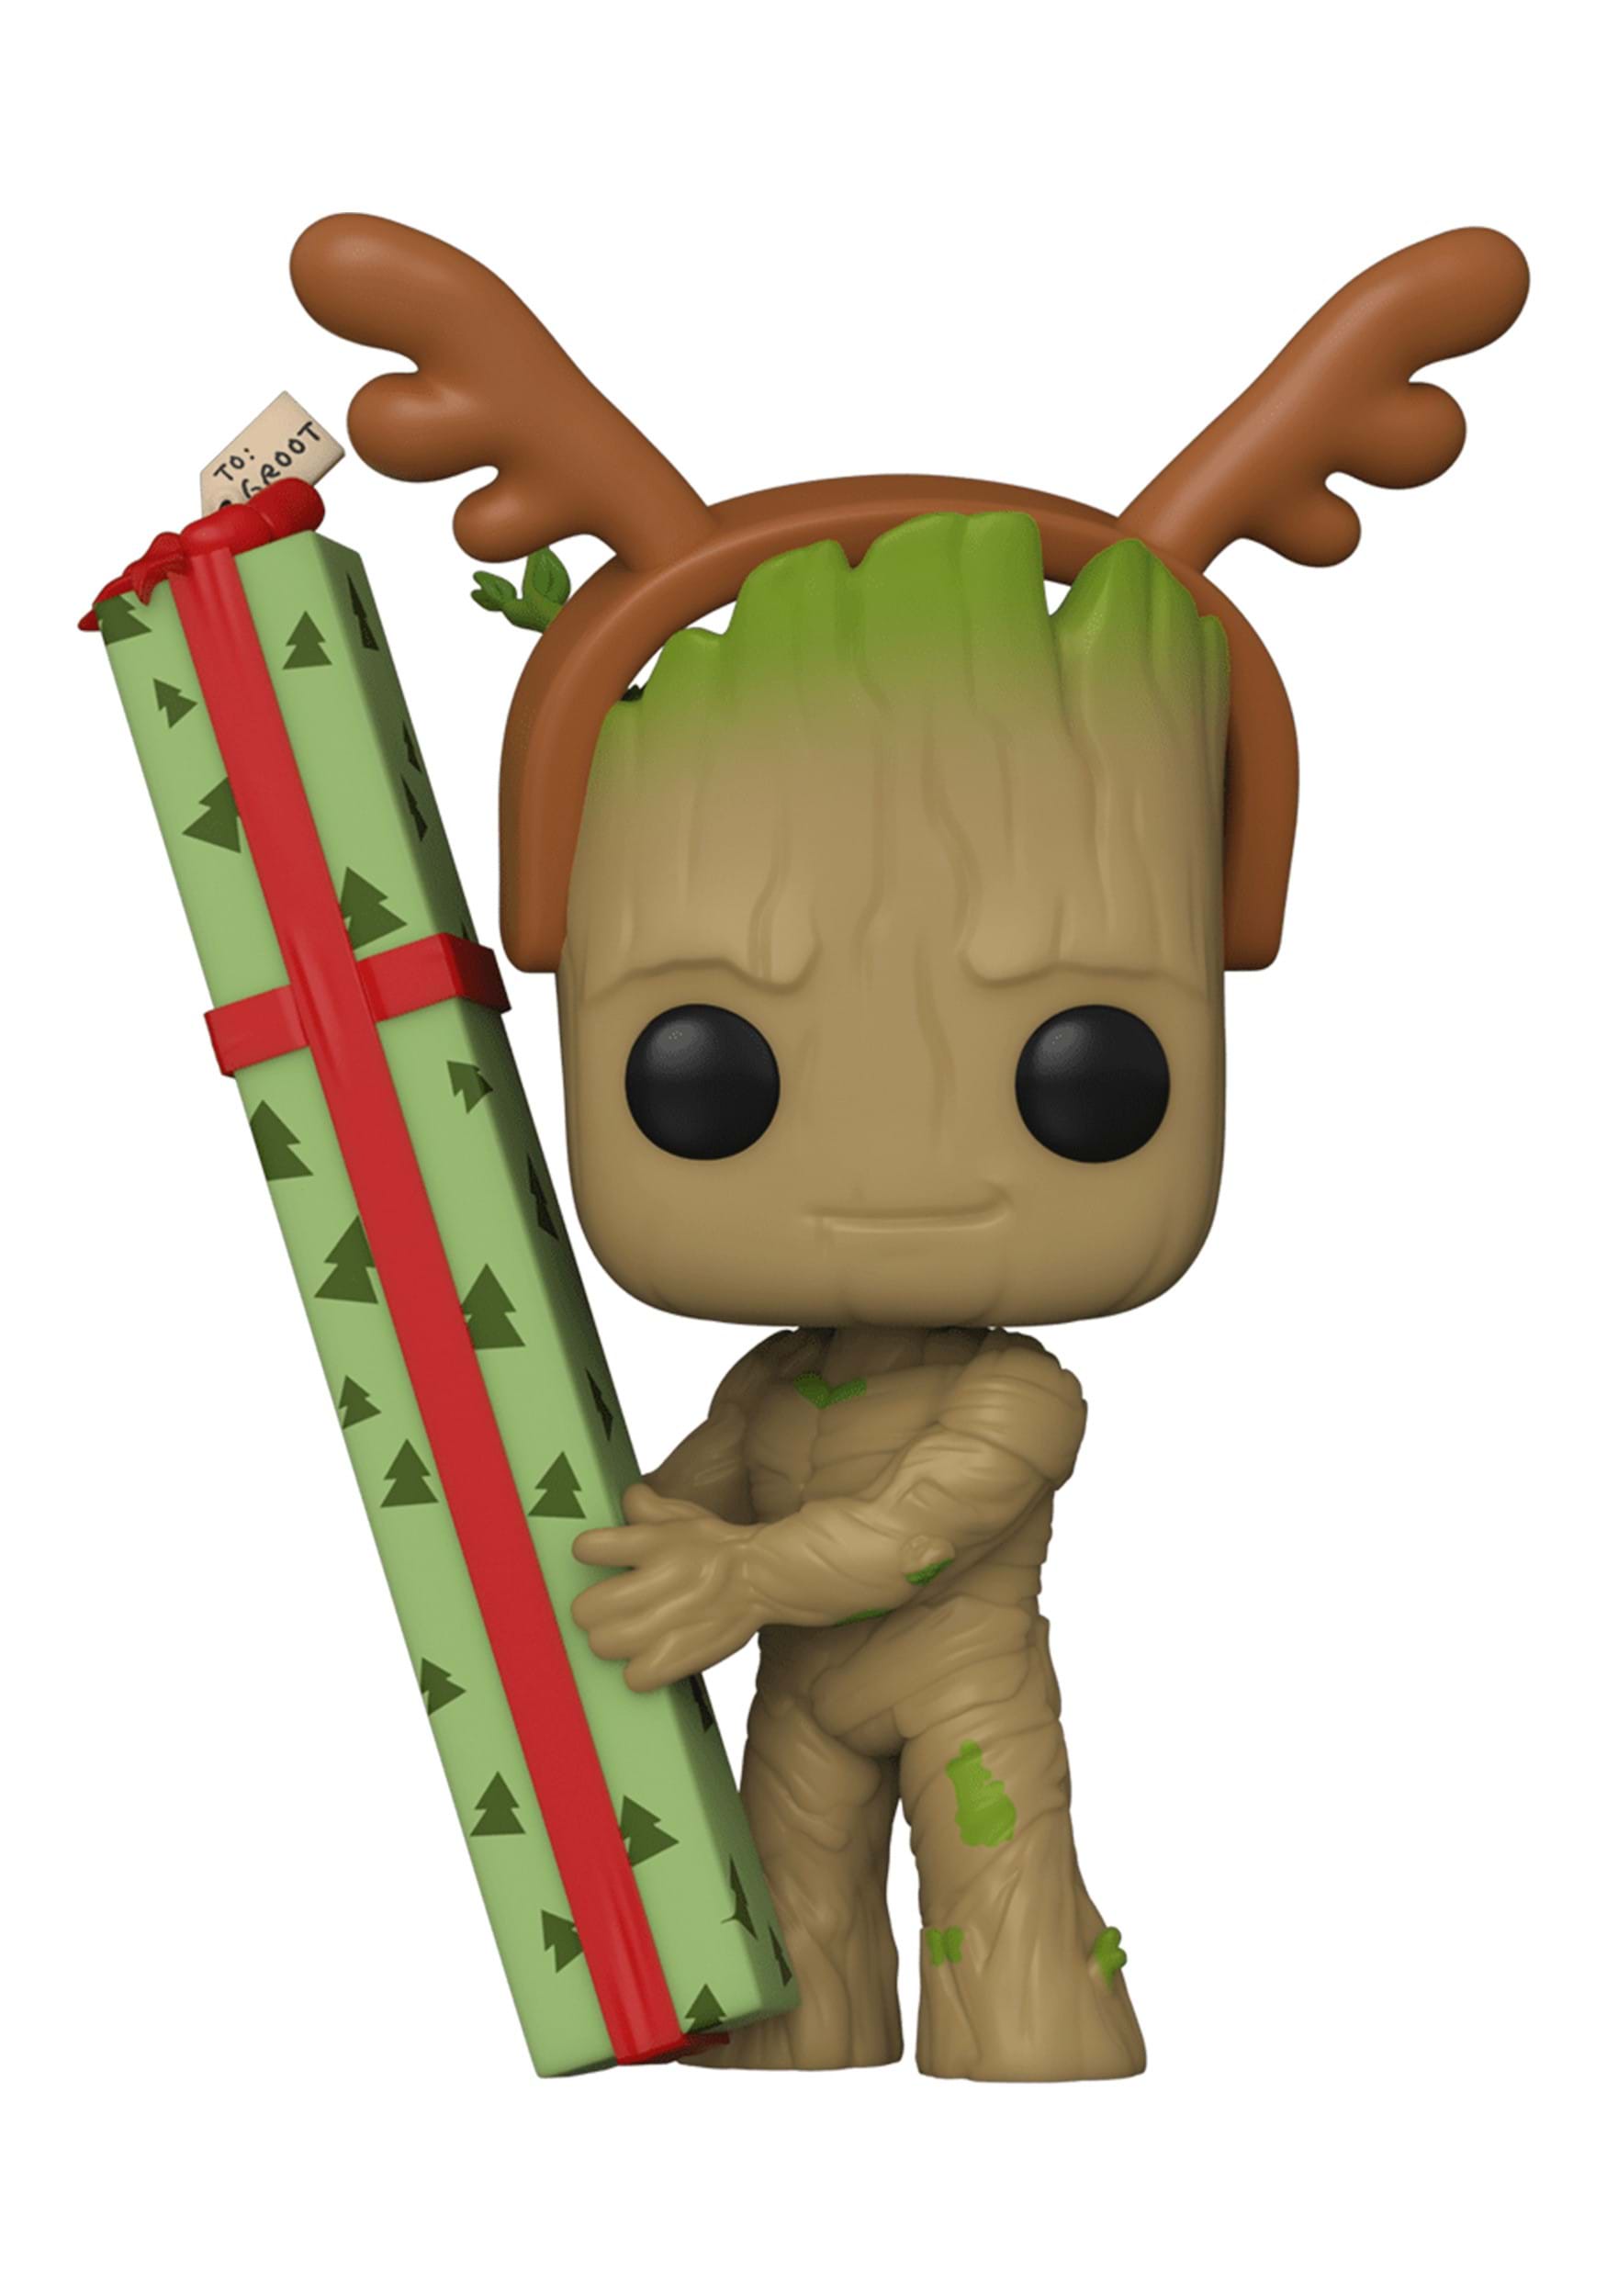  Funko Pop! Marvel: Guardians of The Galaxy Volume 3 - Groot :  Toys & Games